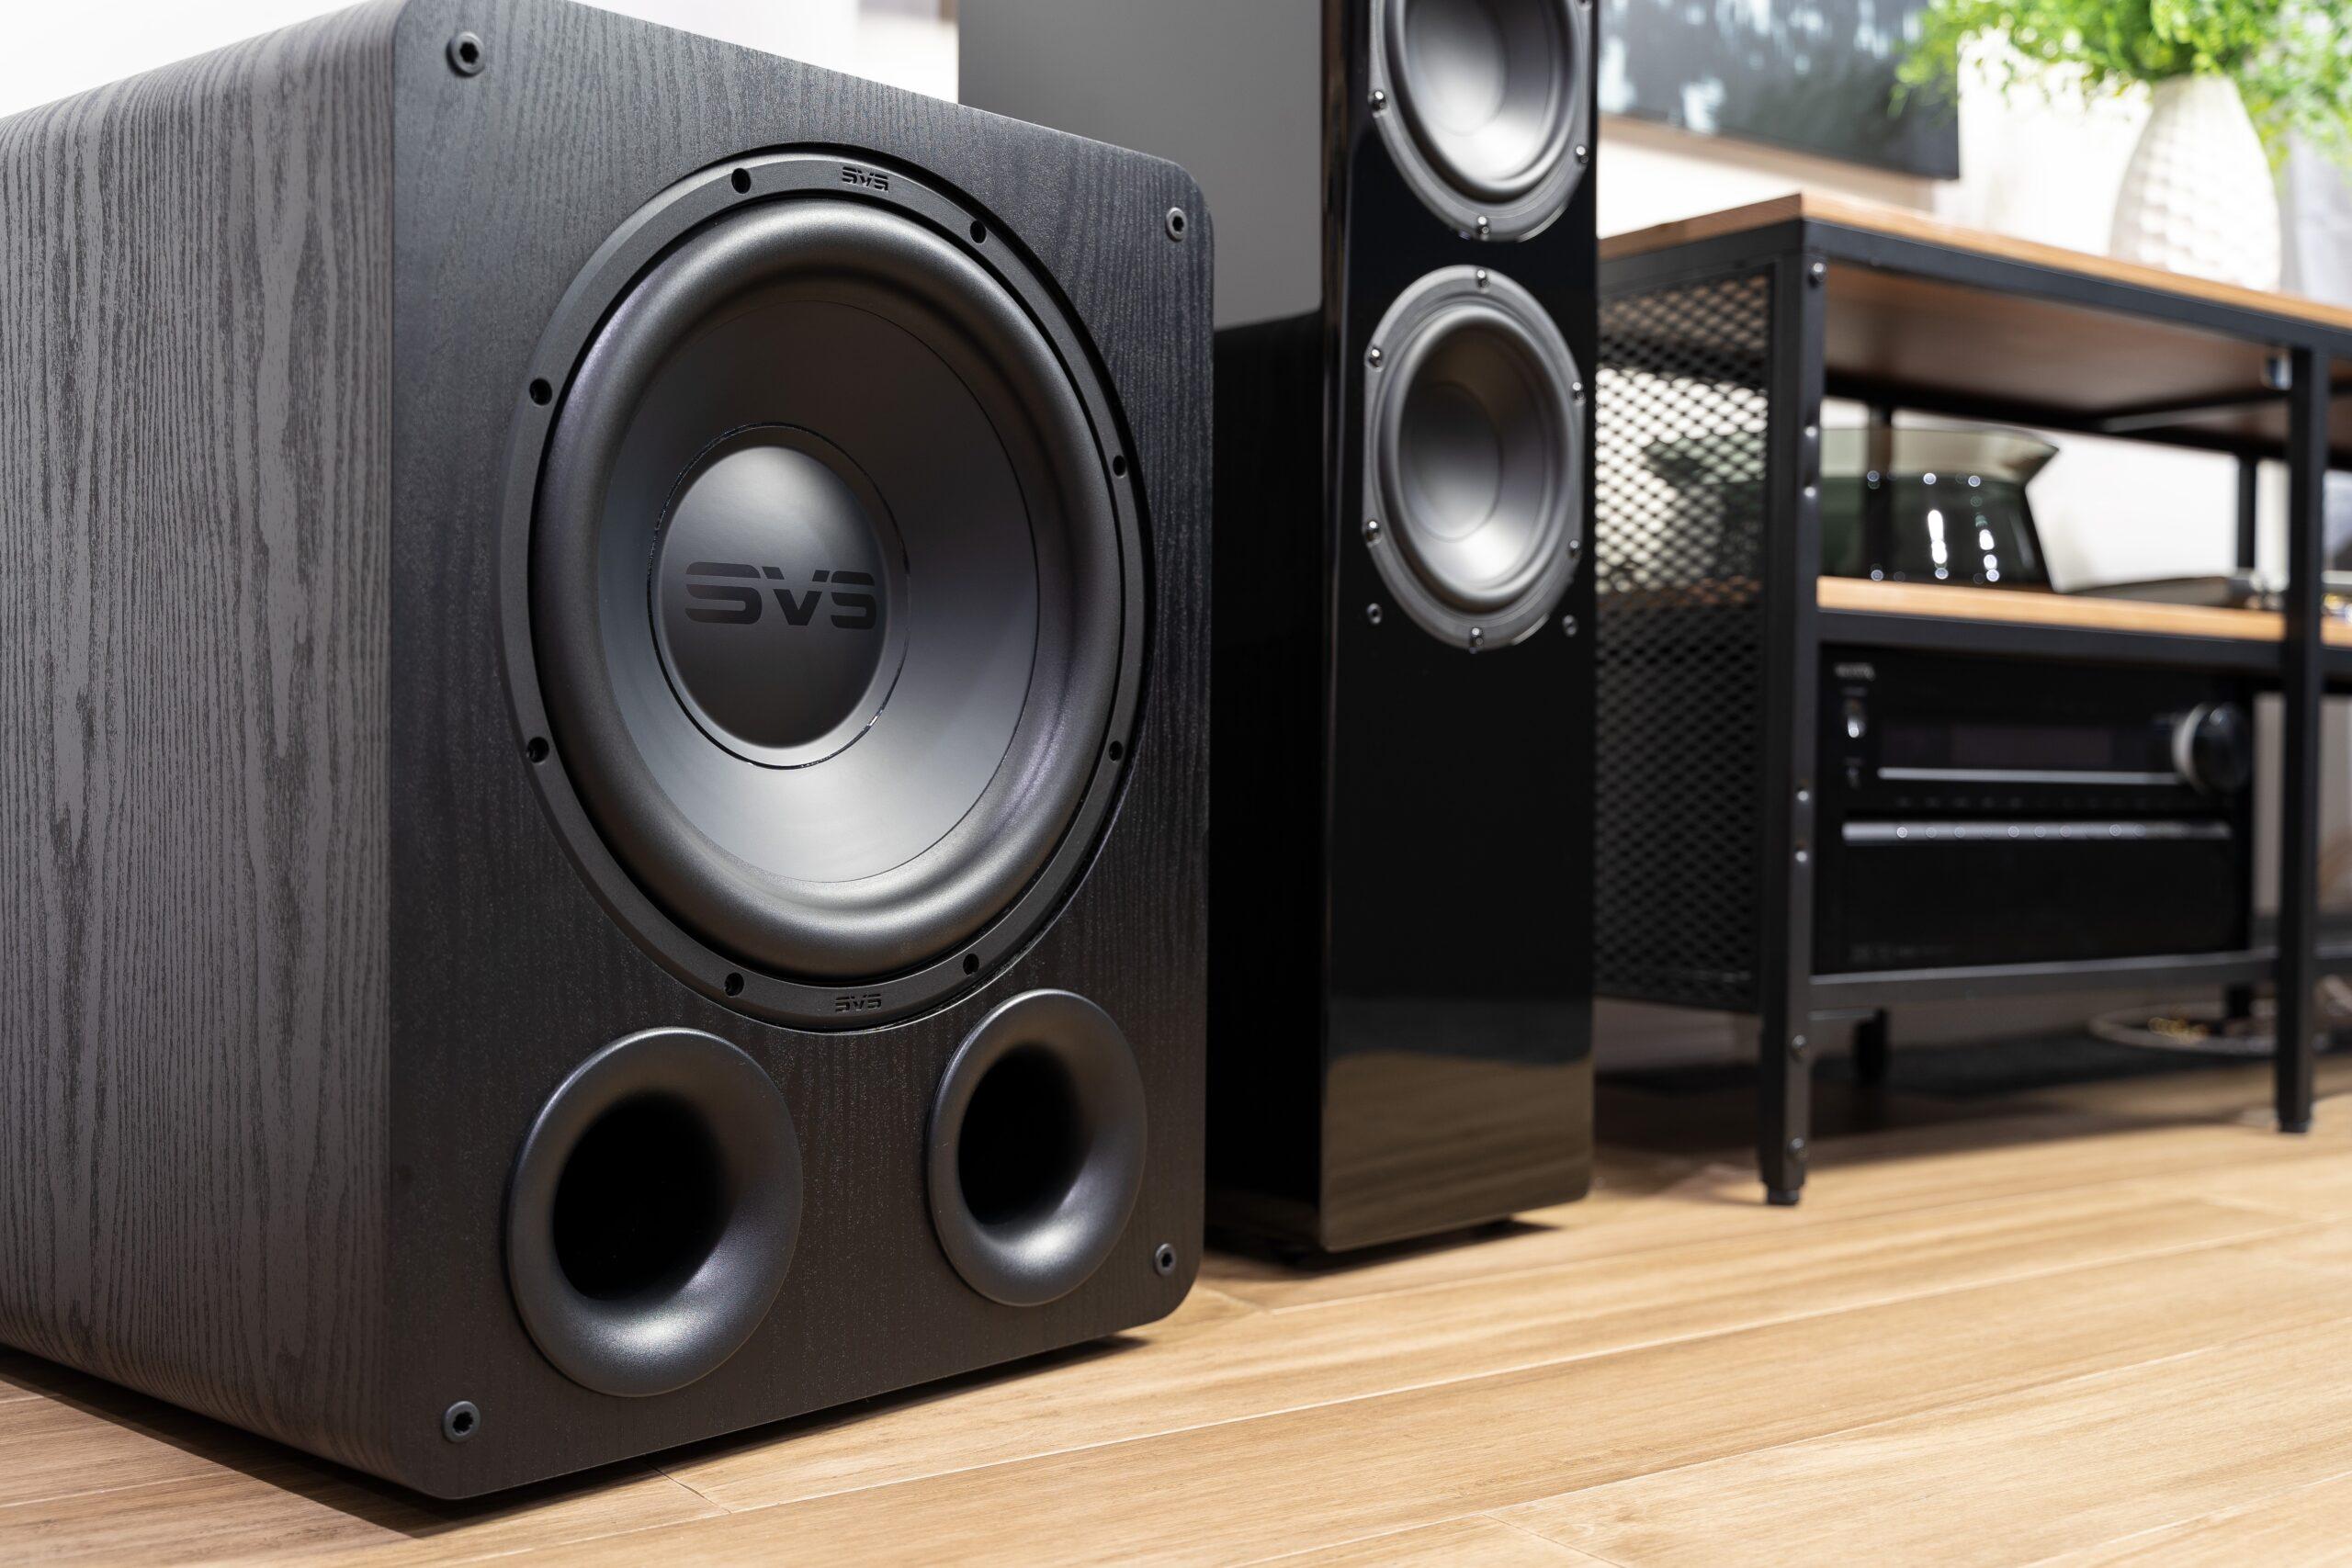 Svs Sb 1000 Pro And Pb 1000 Pro Subwoofers Review Hometheaterreview